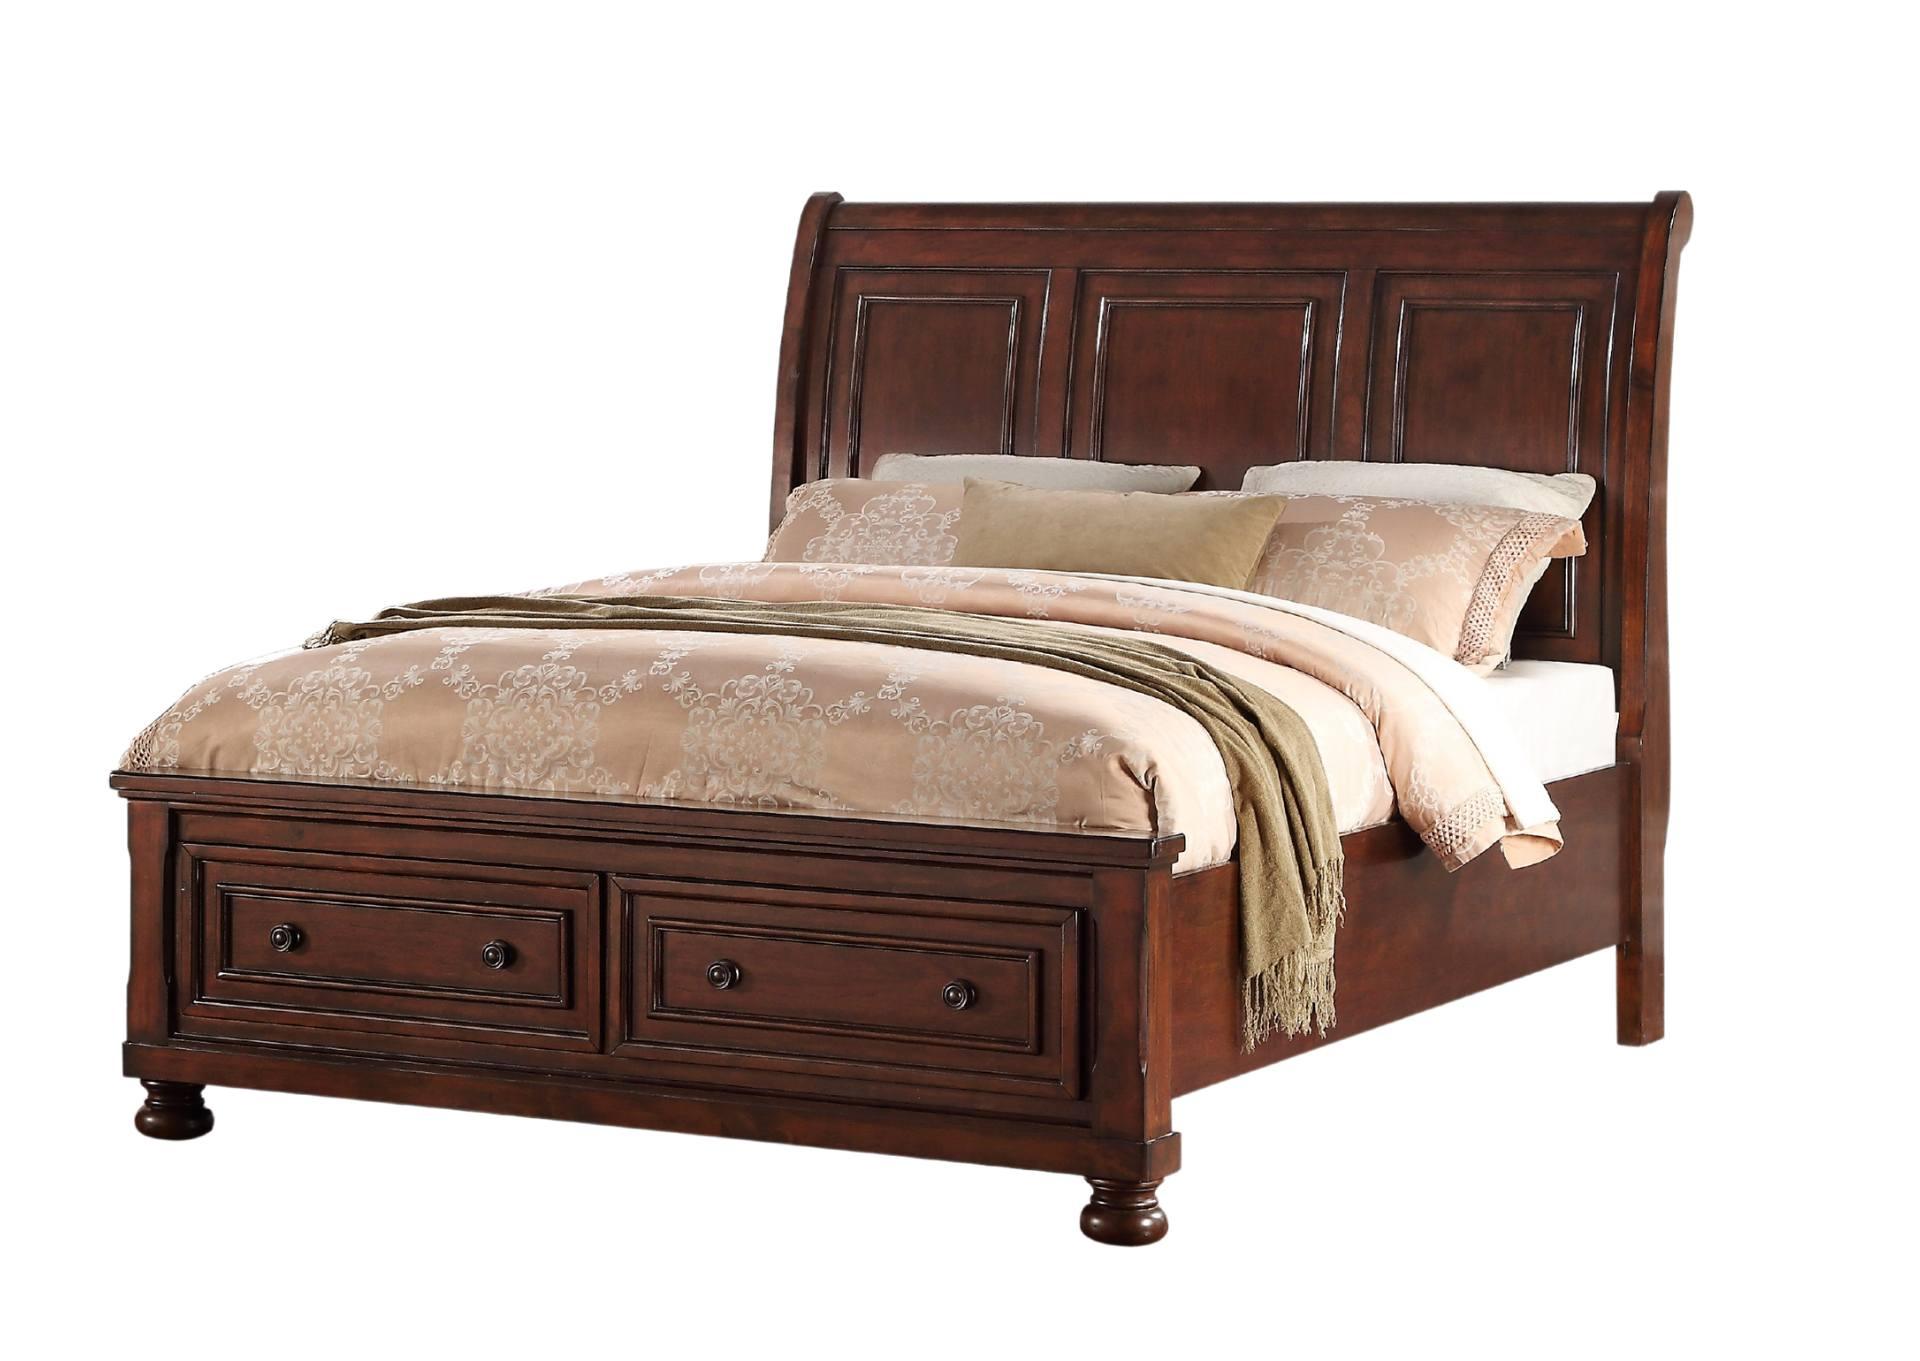 KINGSMAN CHERRY QUEEN BED,AVALON FURNITURE